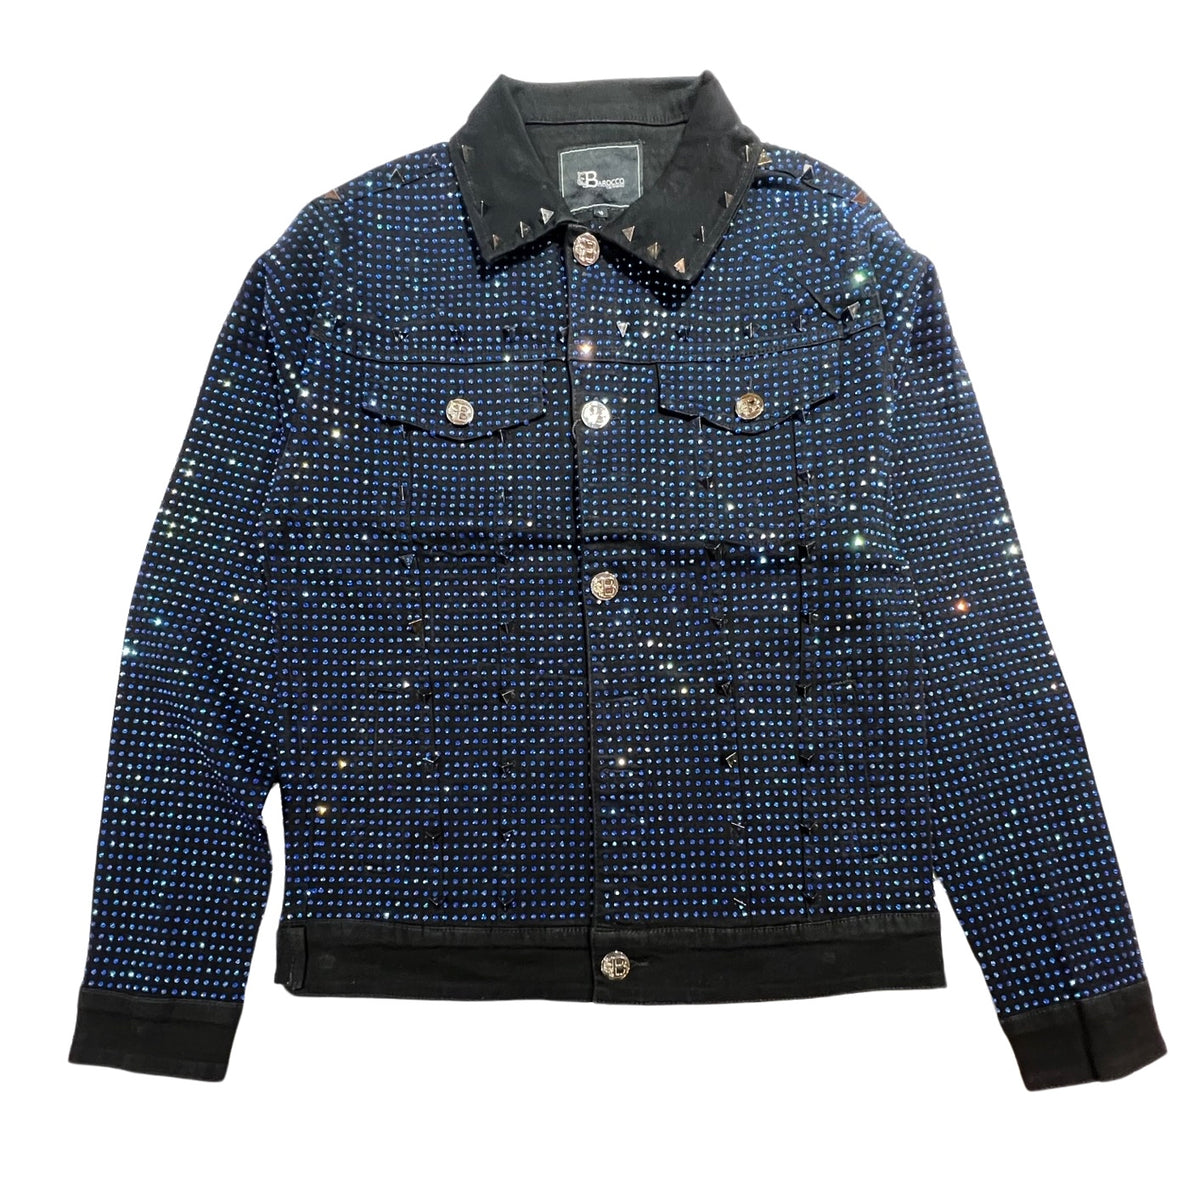 Barocco Black Fully Loaded Blue Crystal Spiked Jean Jacket - Dudes Boutique